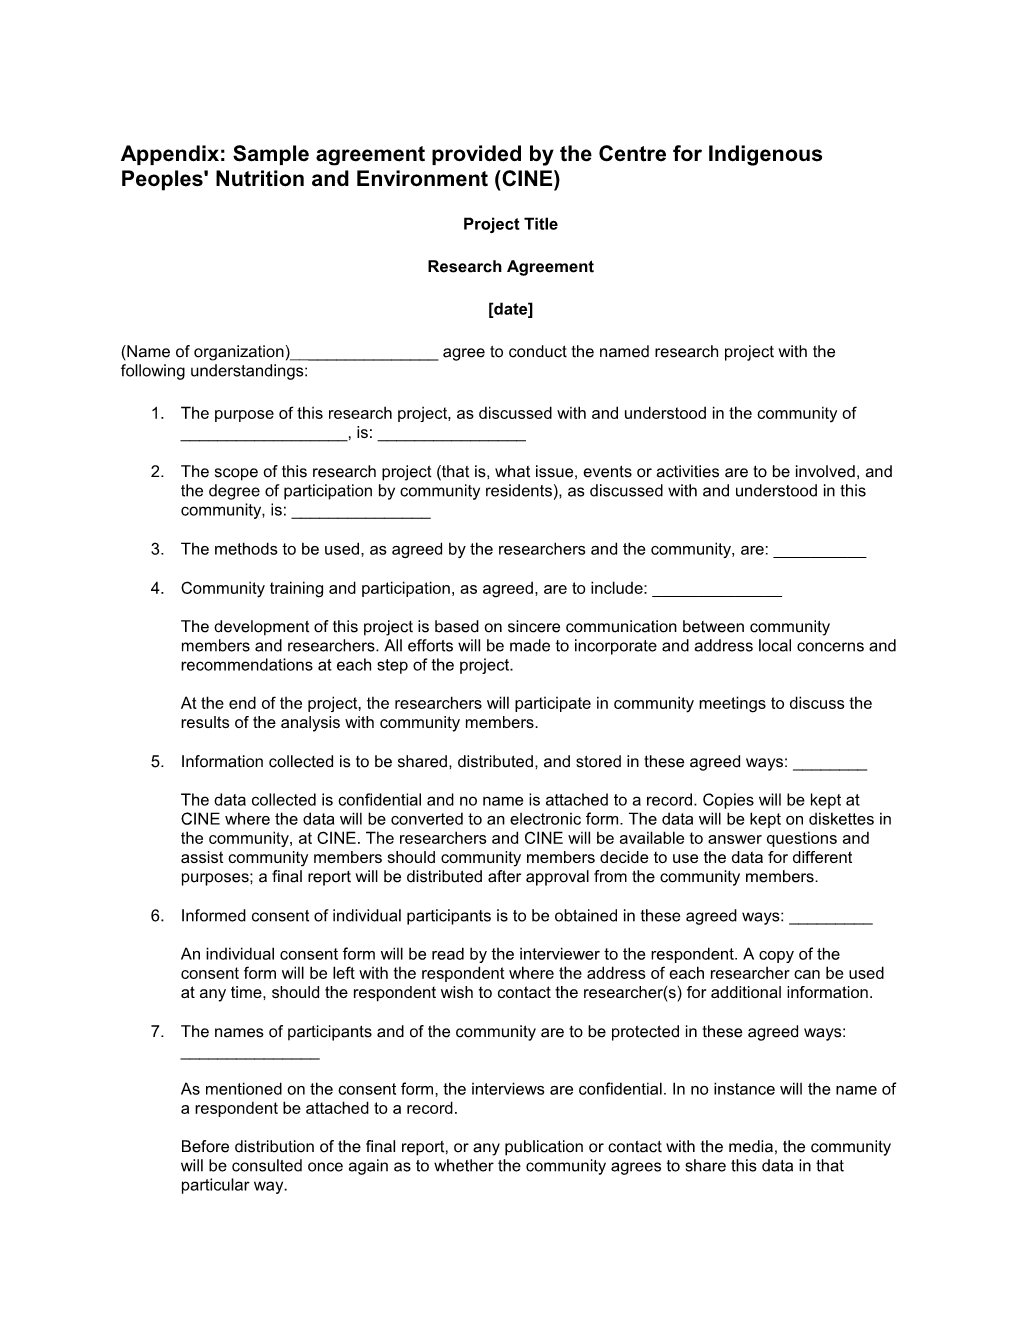 Appendix: Sample Agreement Provided by the Centre for Indigenous Peoples' Nutrition And